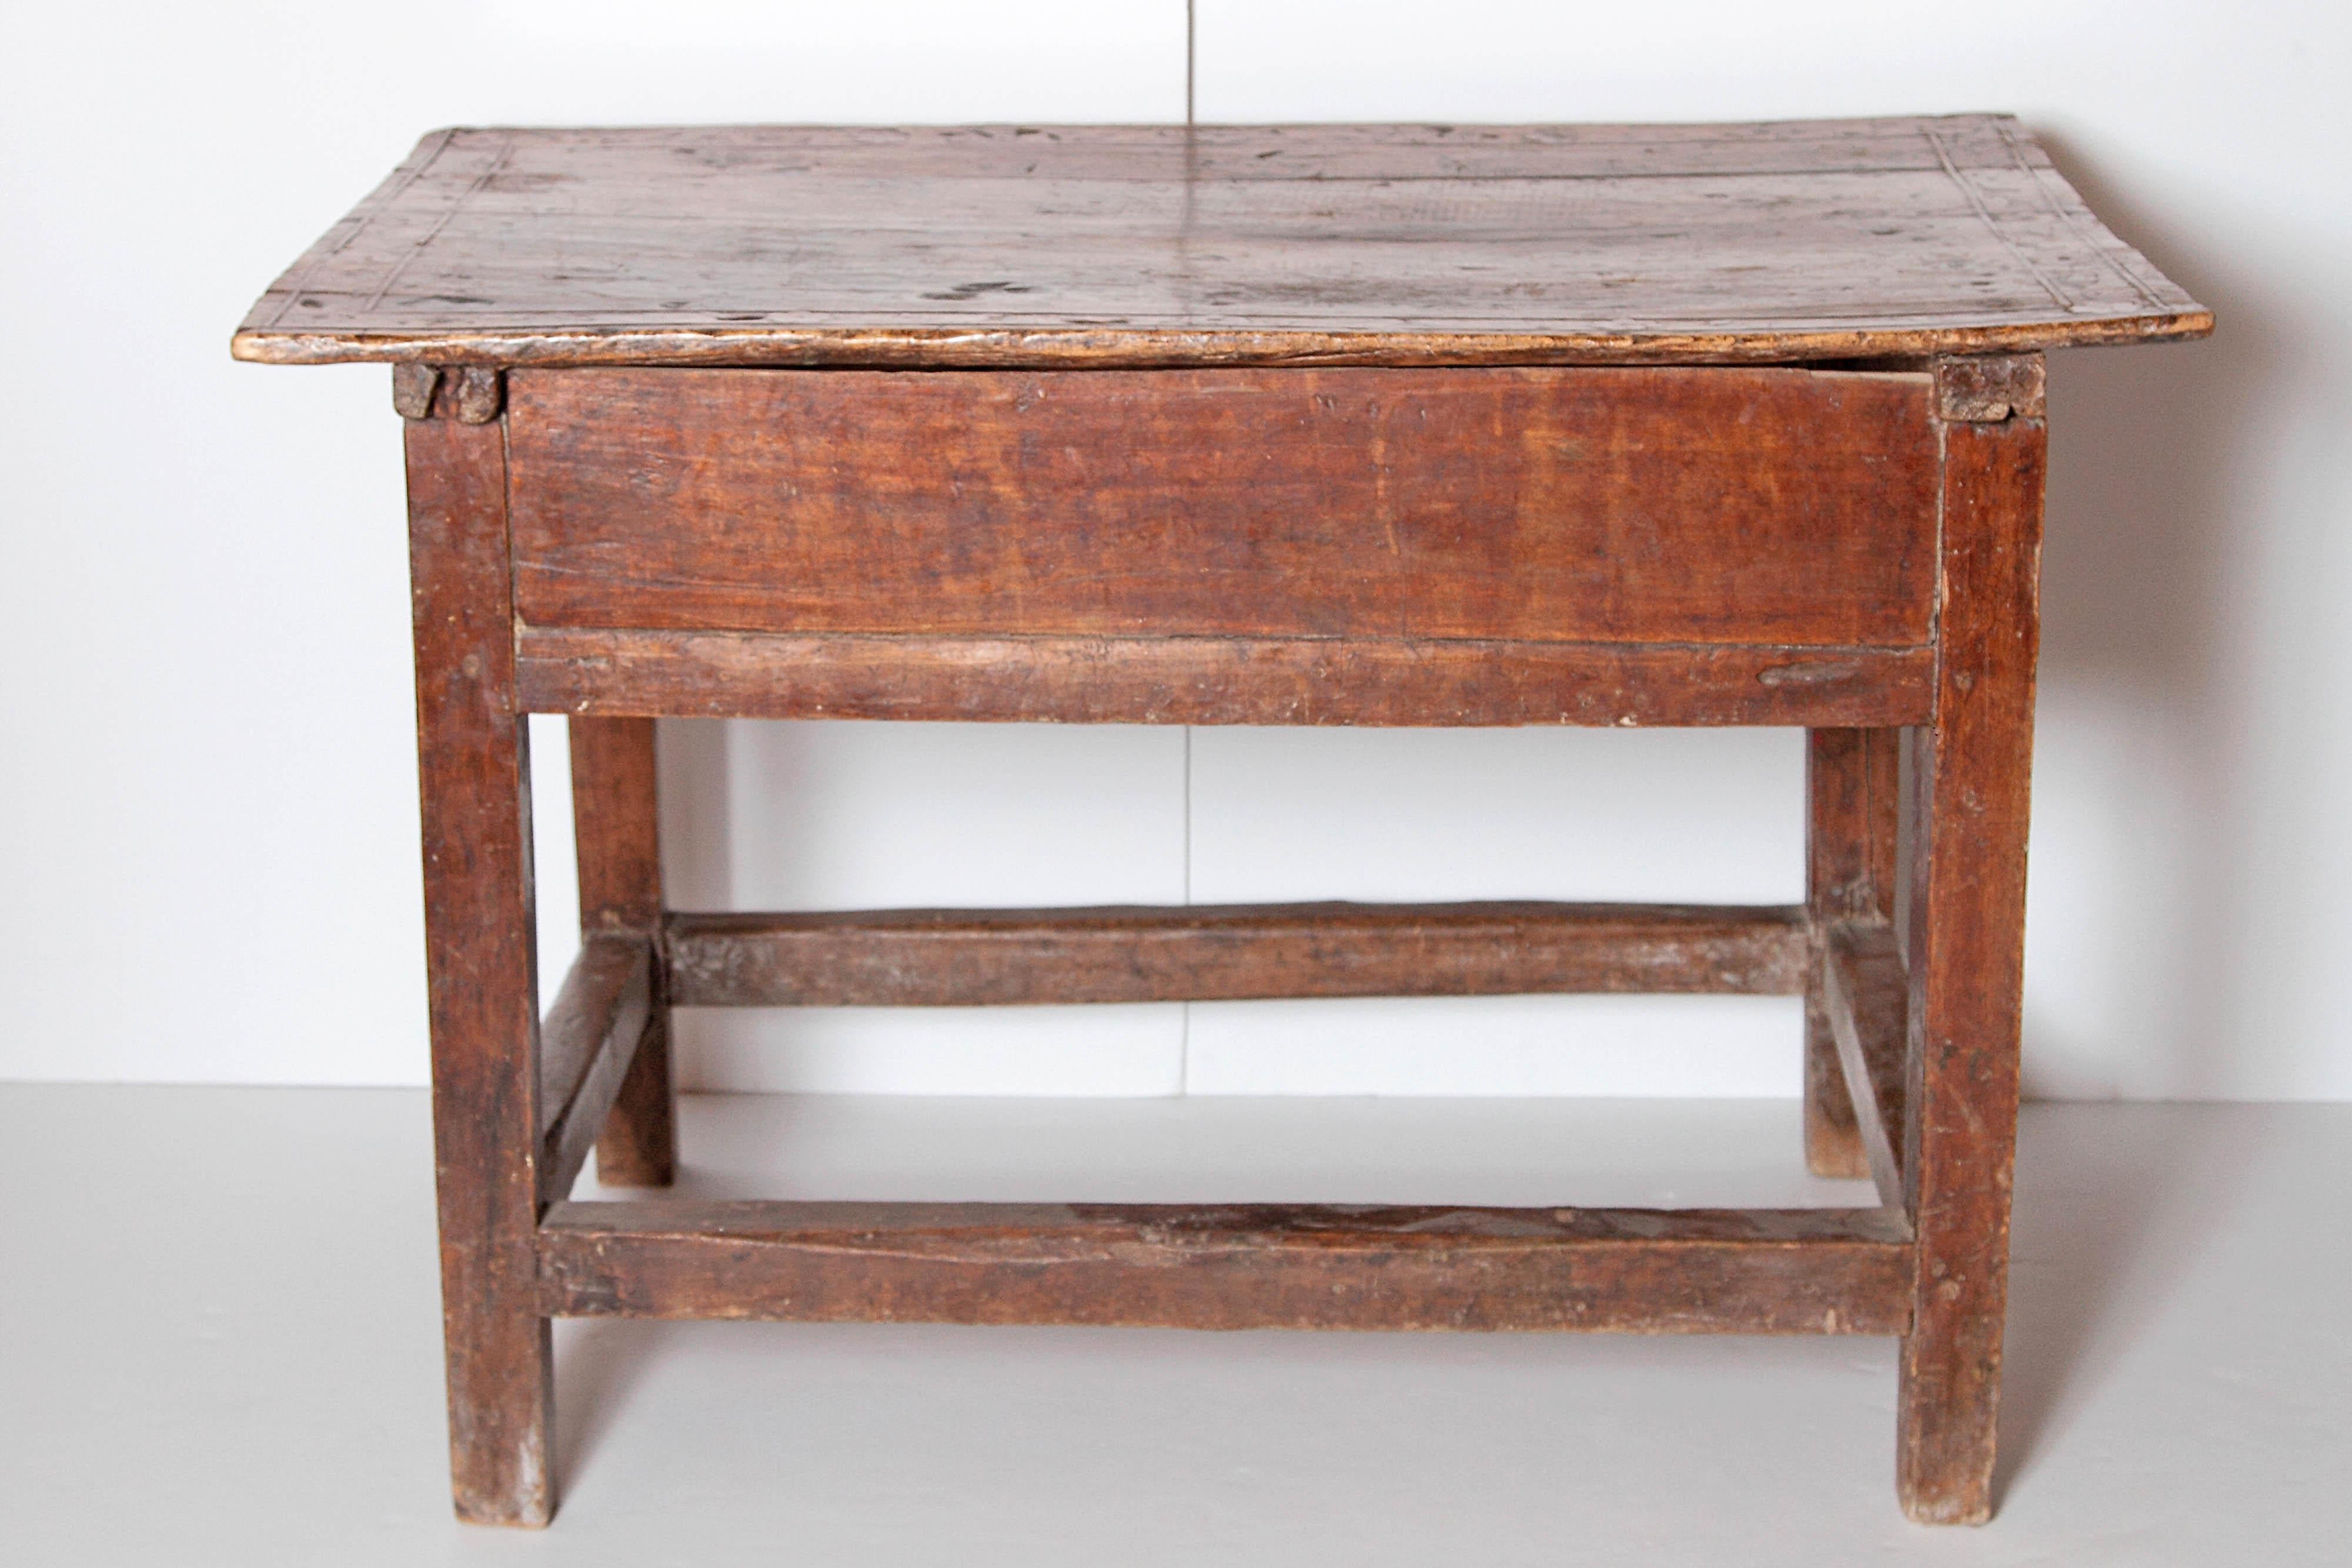 Wood 18th Century Spanish Colonial Table from Columbia